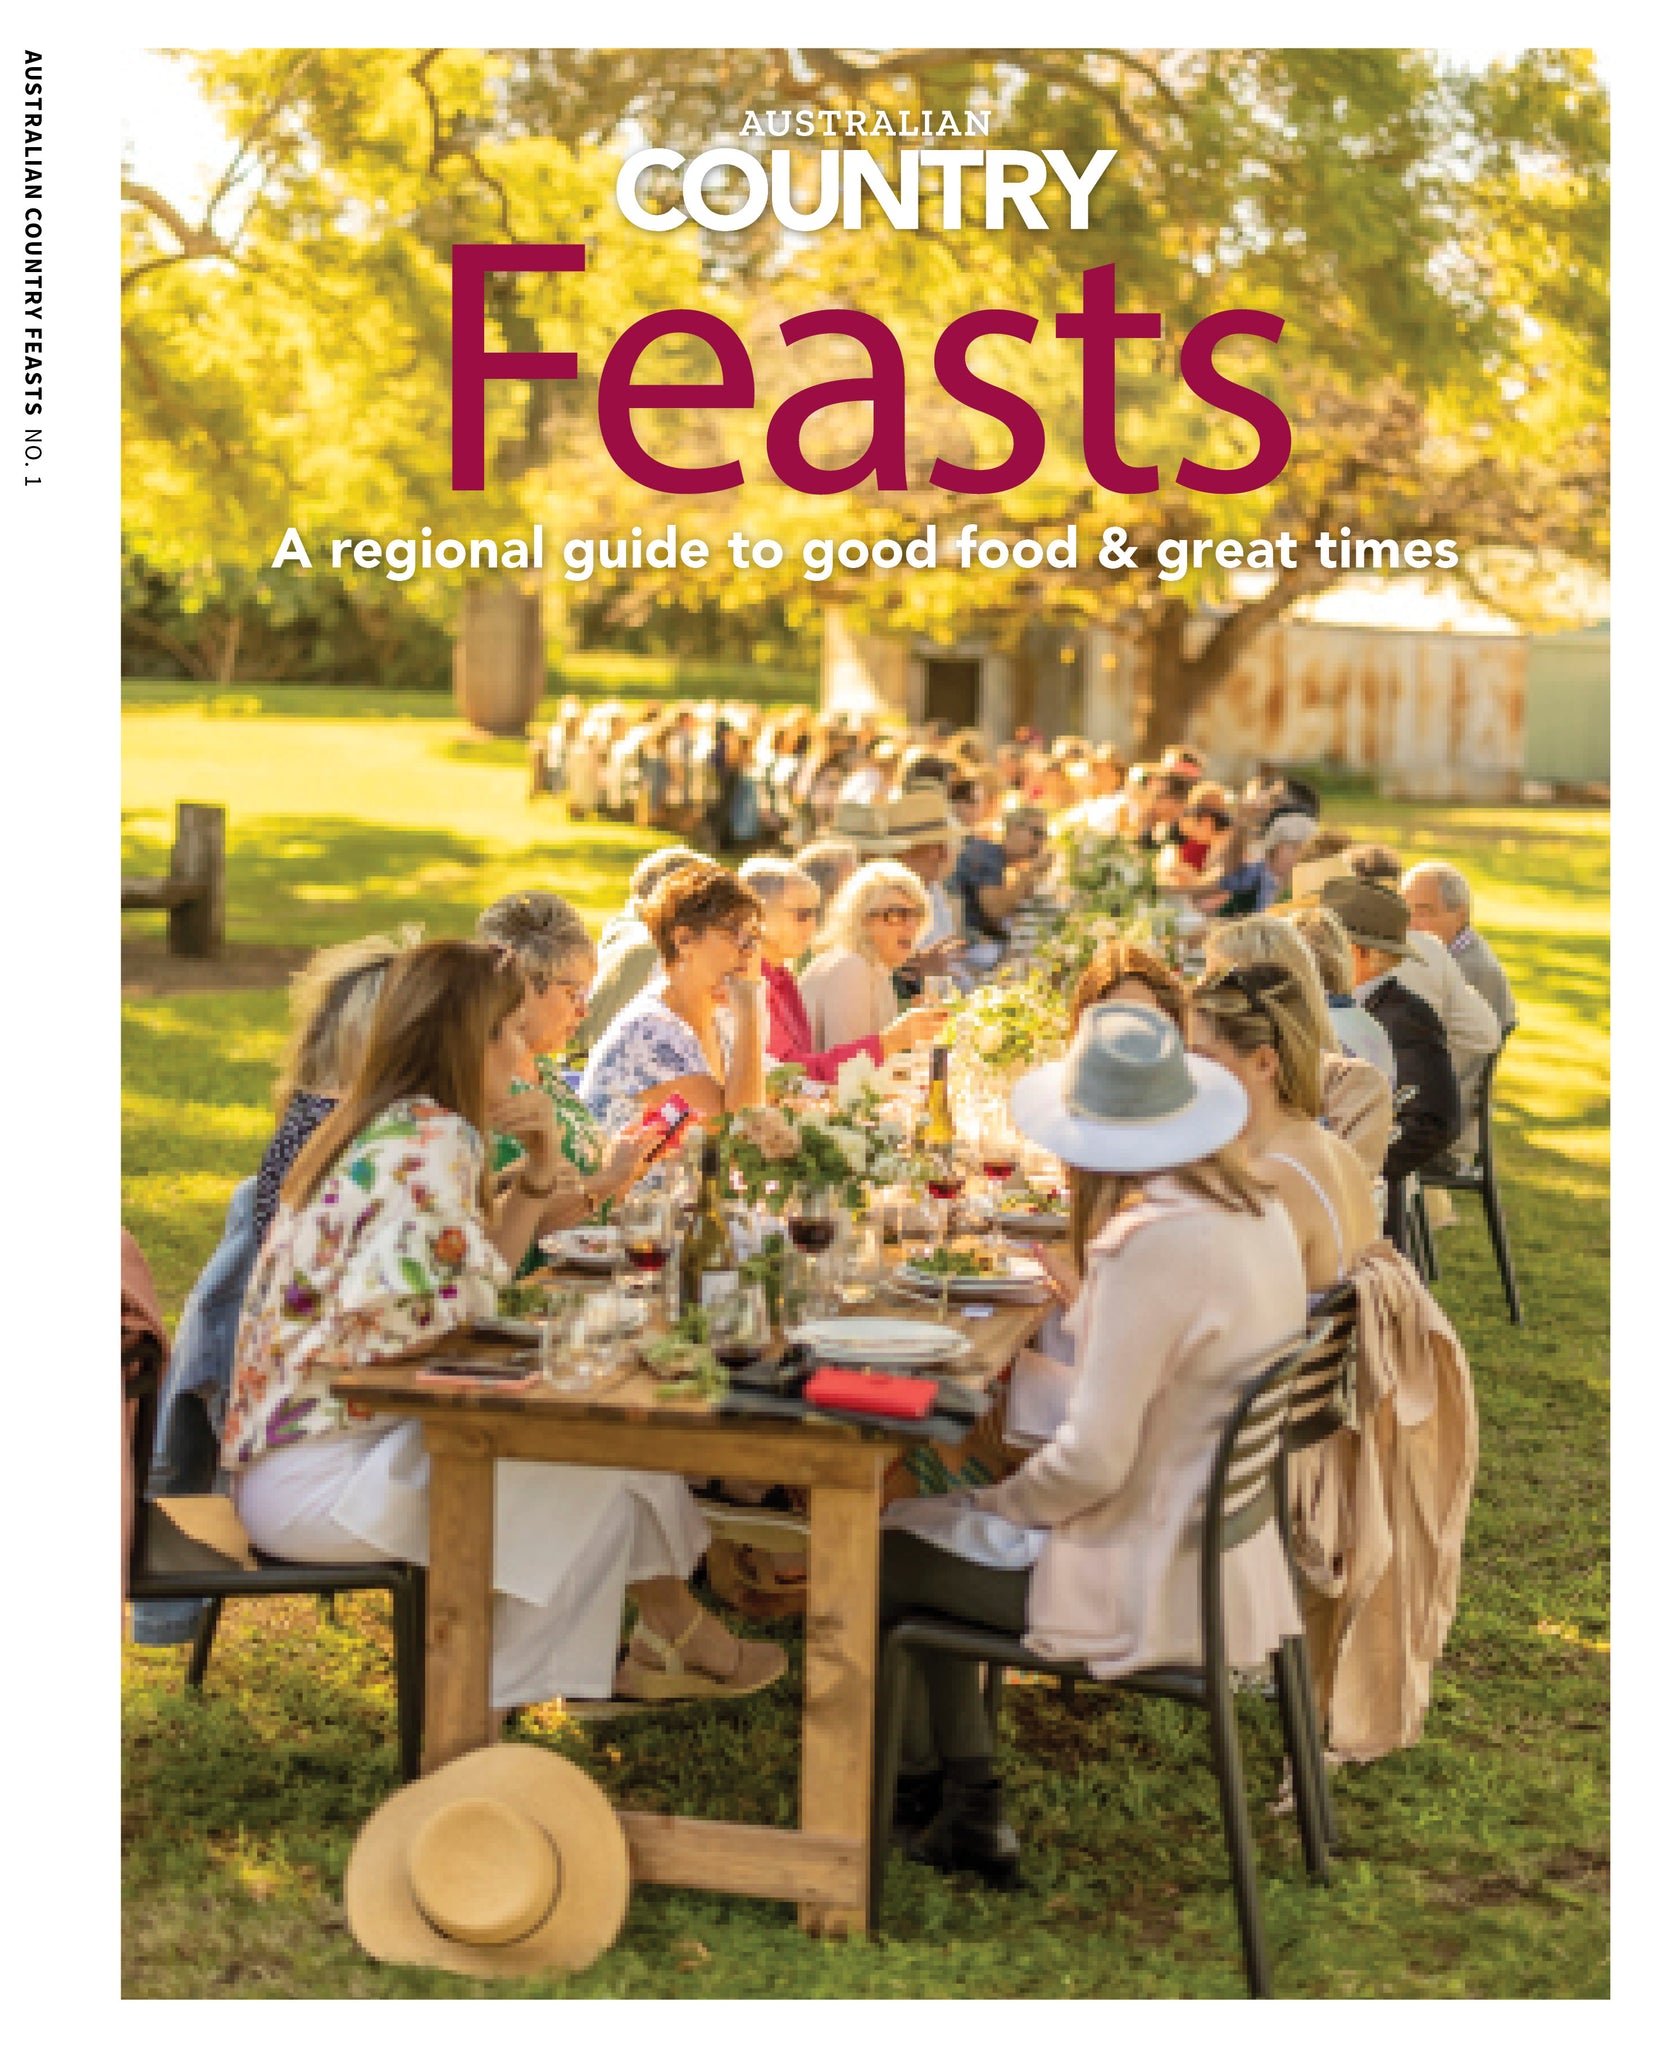 Australian Country Feast Food & Wine Tourism Cover